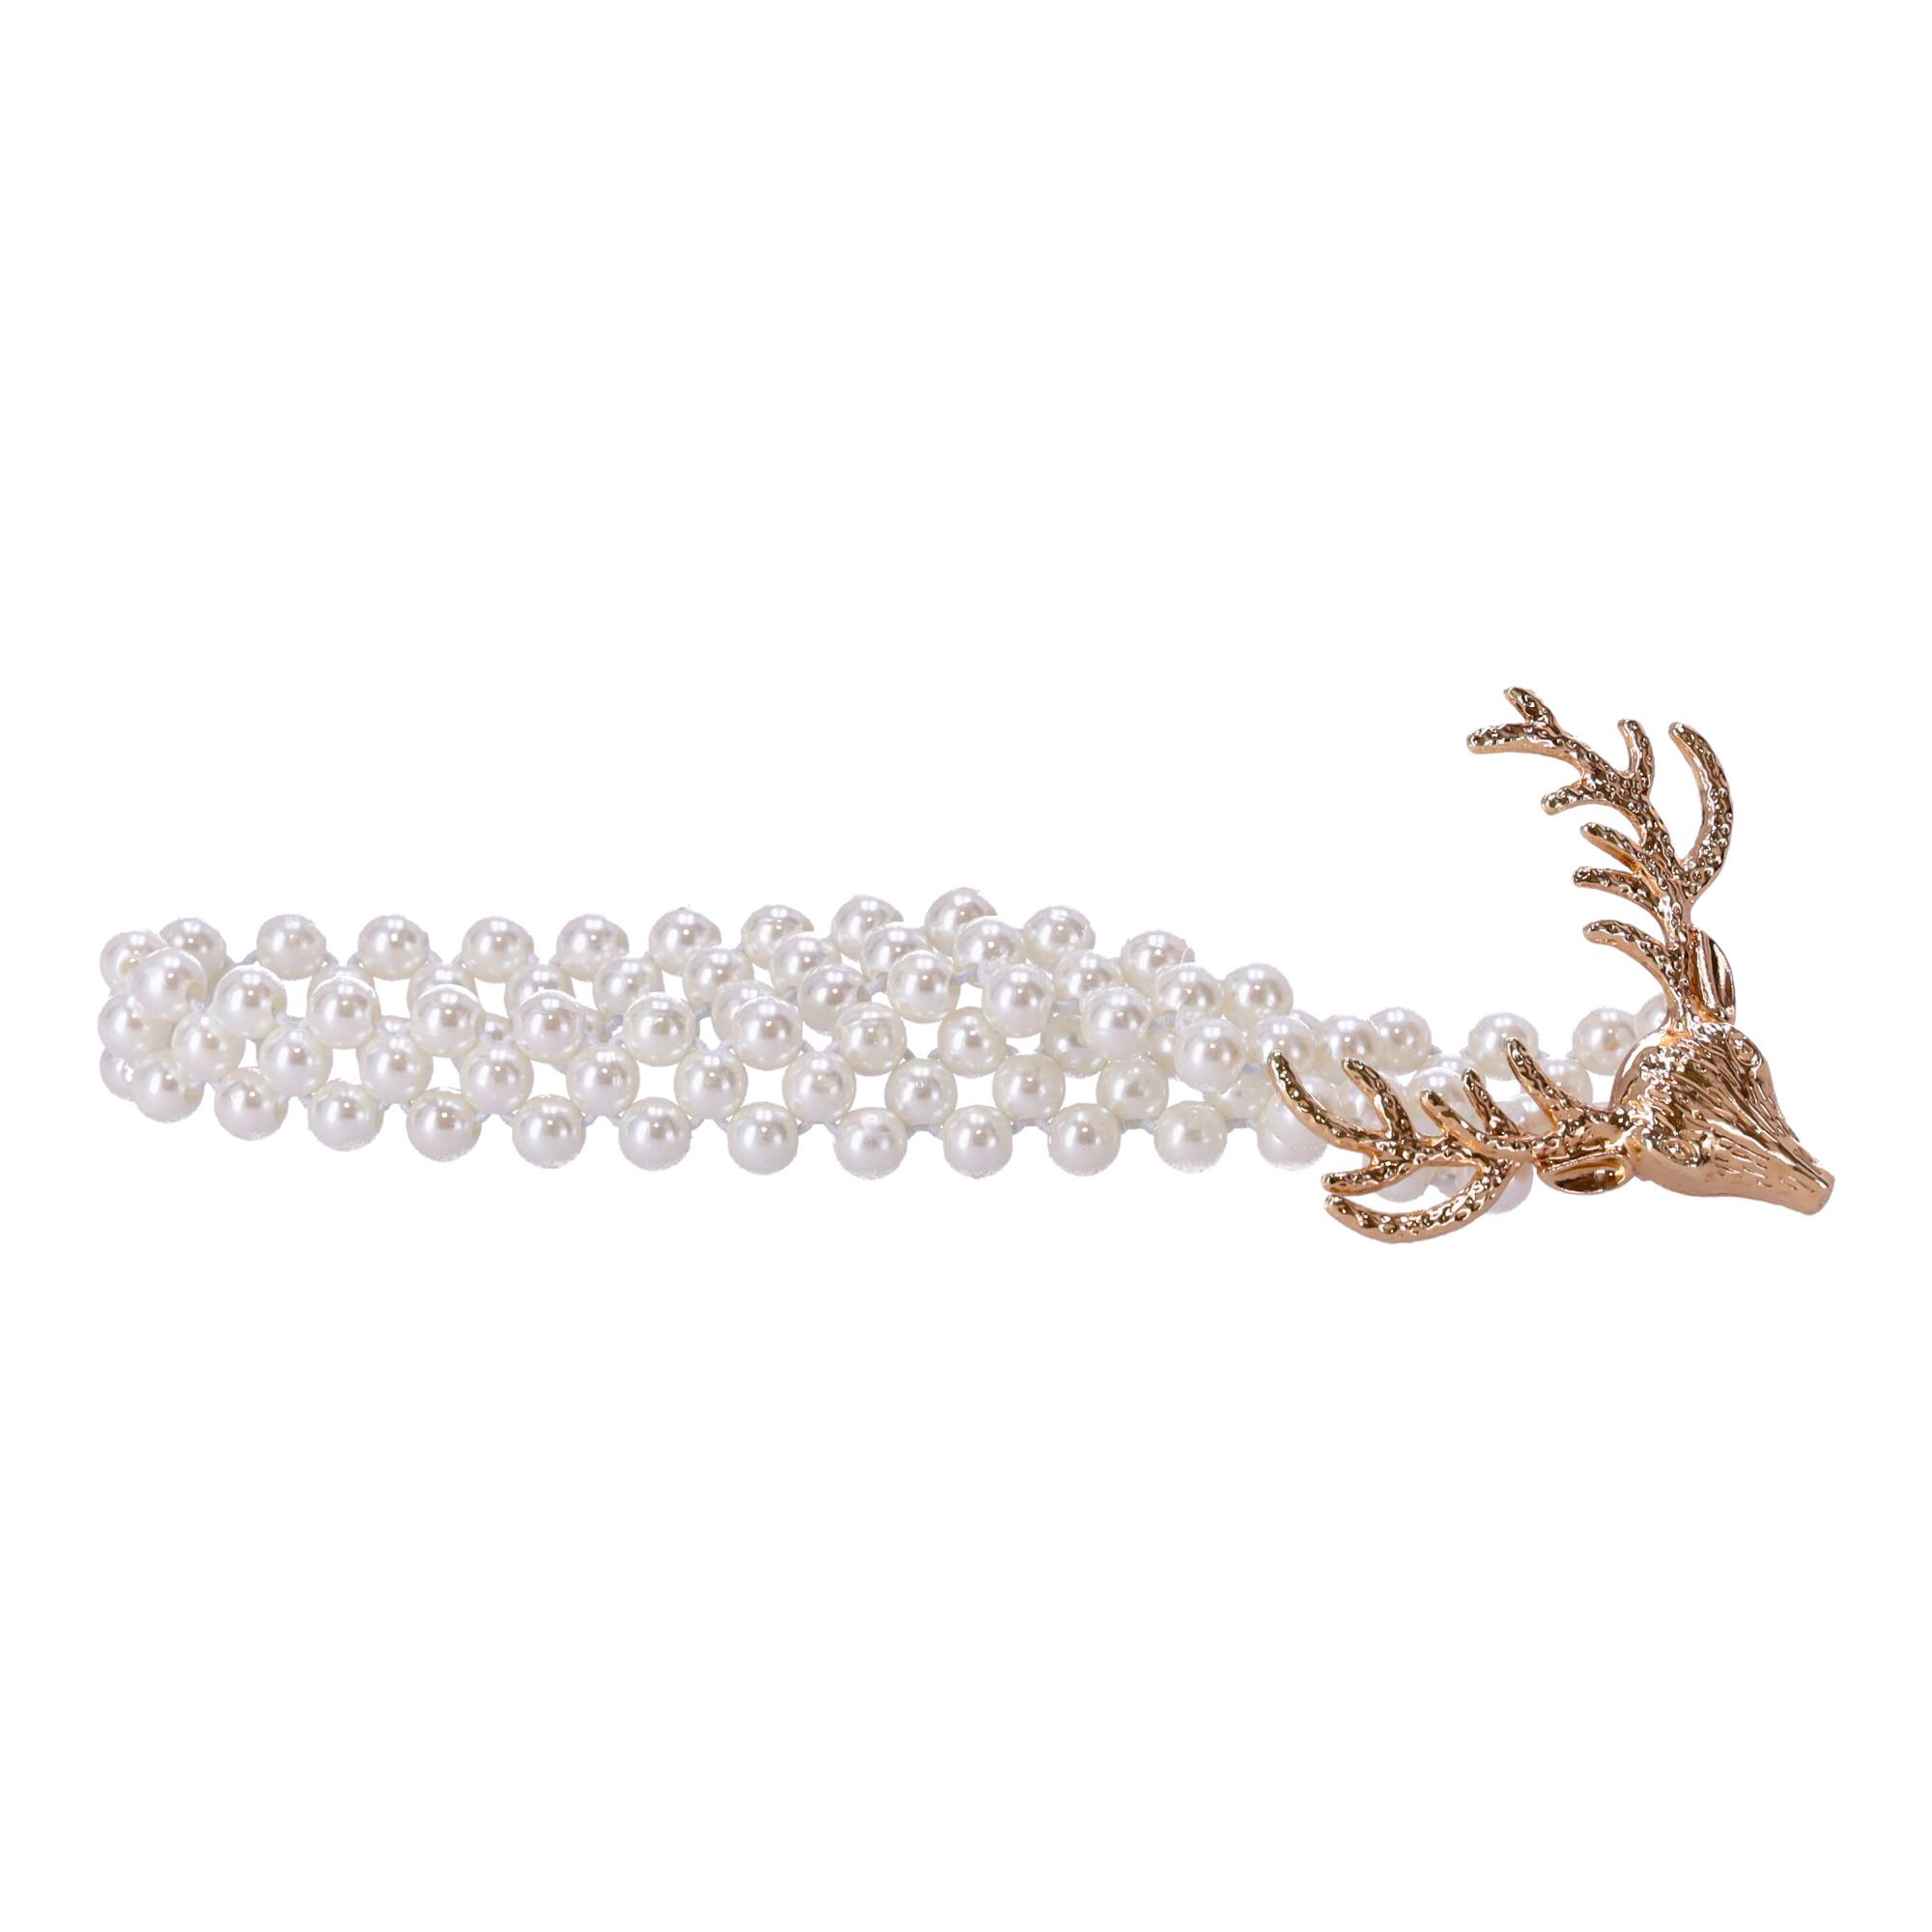 Pearl brace for curtains, curtains with decorative deer